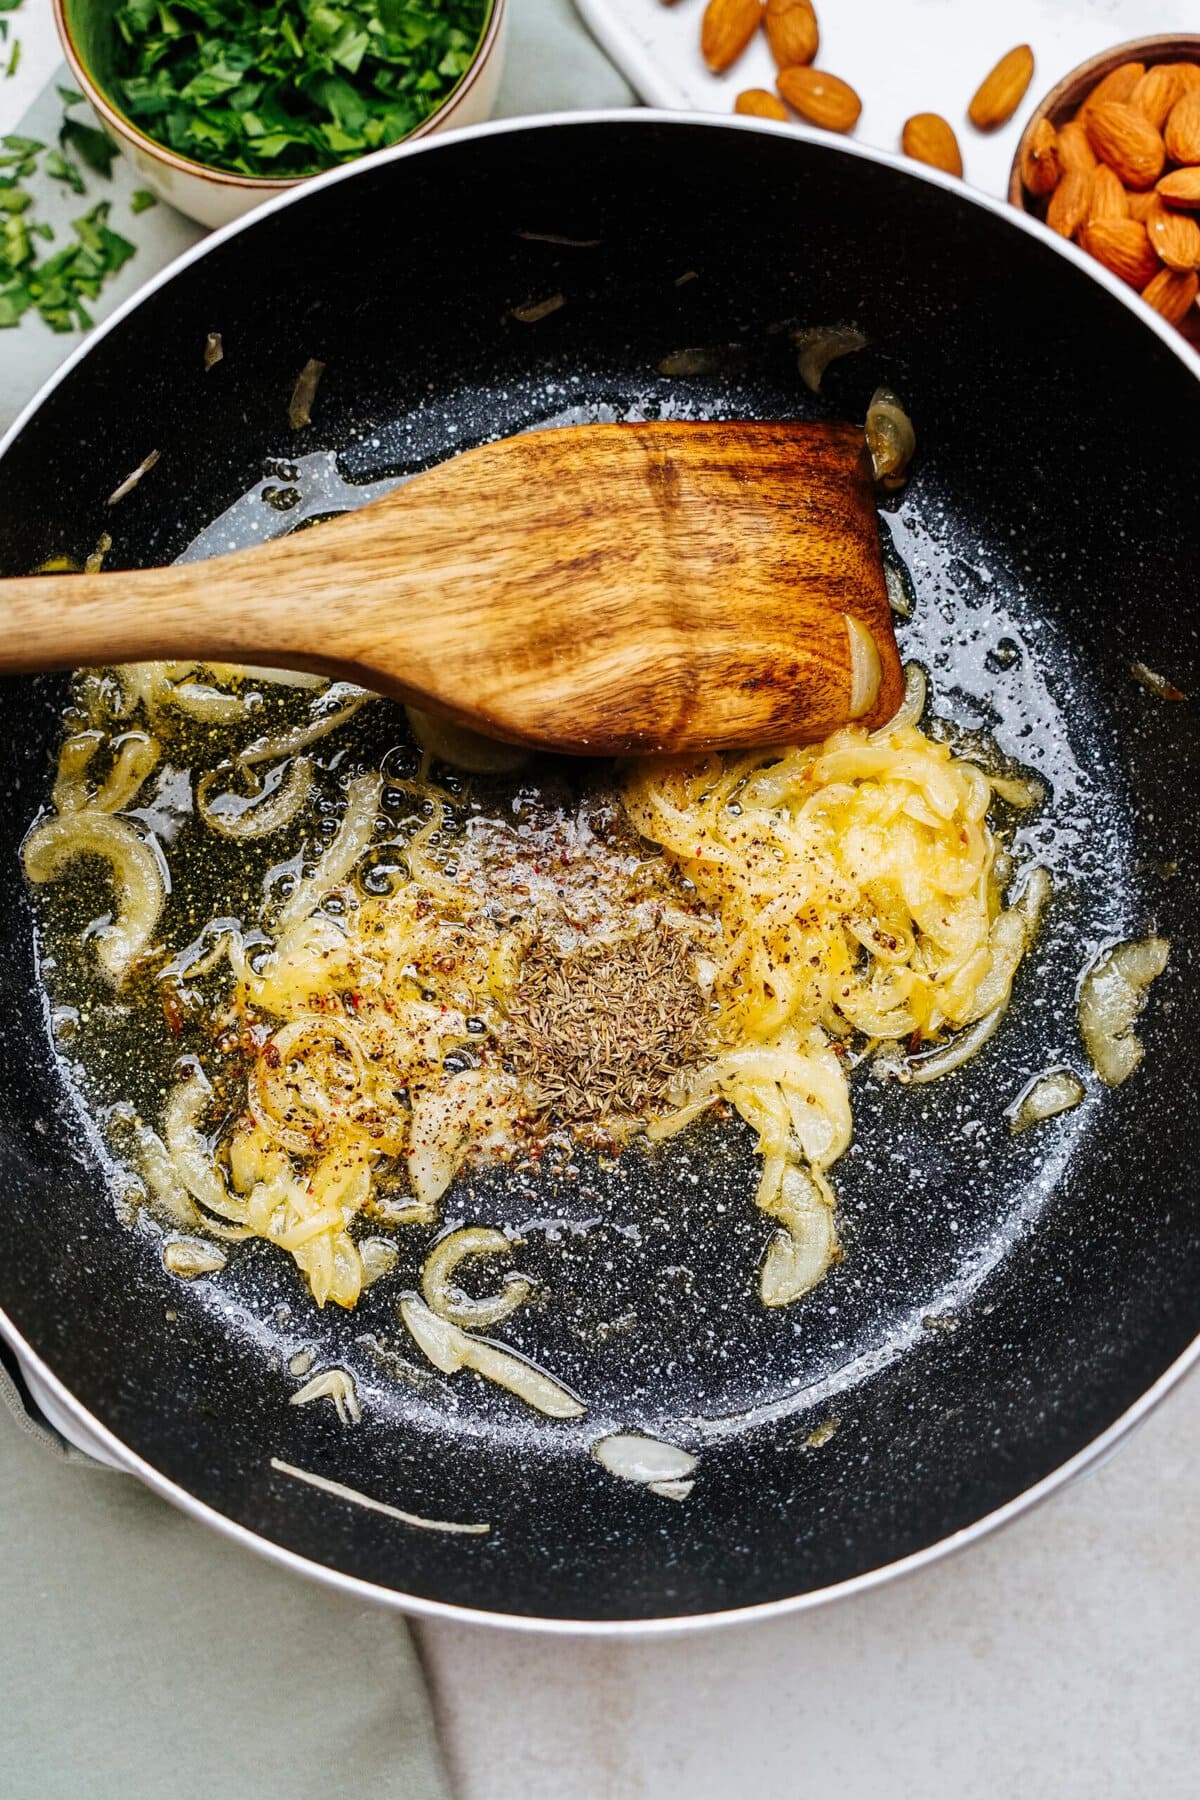 Cooking process in a frying pan with onions, spices, and a wooden spatula. Chopped herbs, almonds, and goat cheese balls are visible nearby.